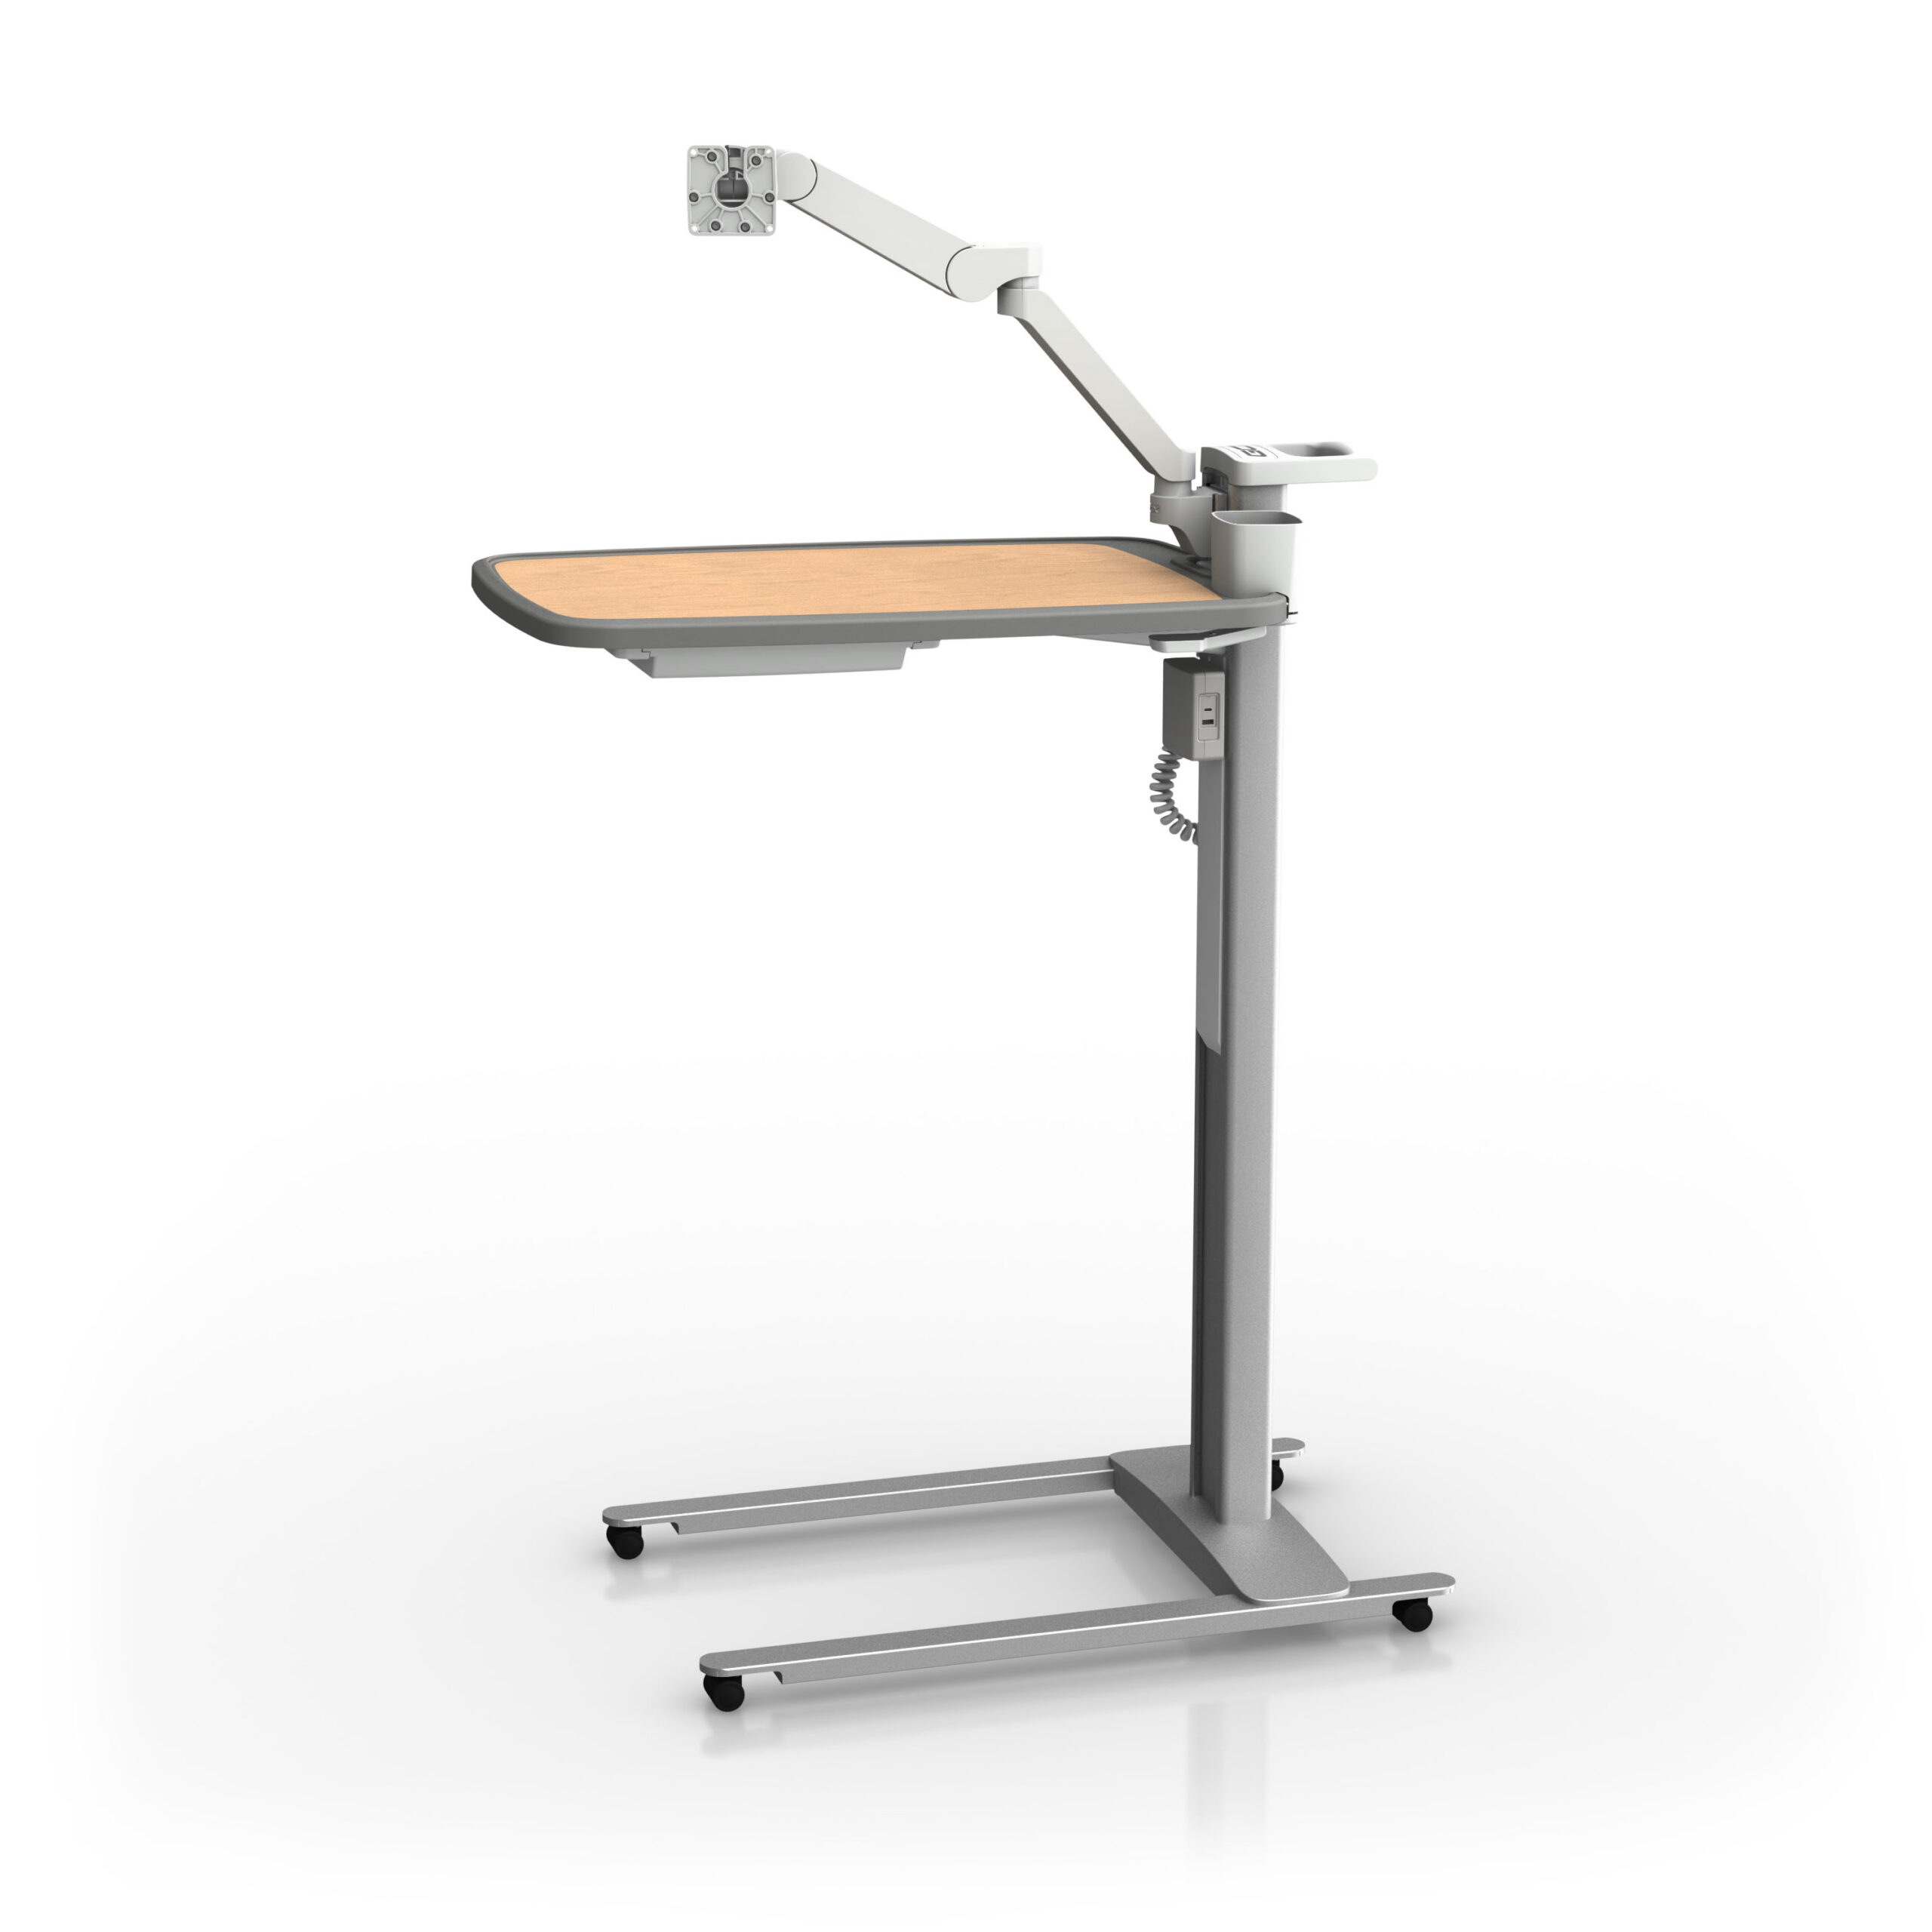 OBT-0011-61-04-44 - OBT-0011-61-04-44 – Fusion Maple Patient Engagement Overbed Table with PRO-ADJUST™ Tablet Arm